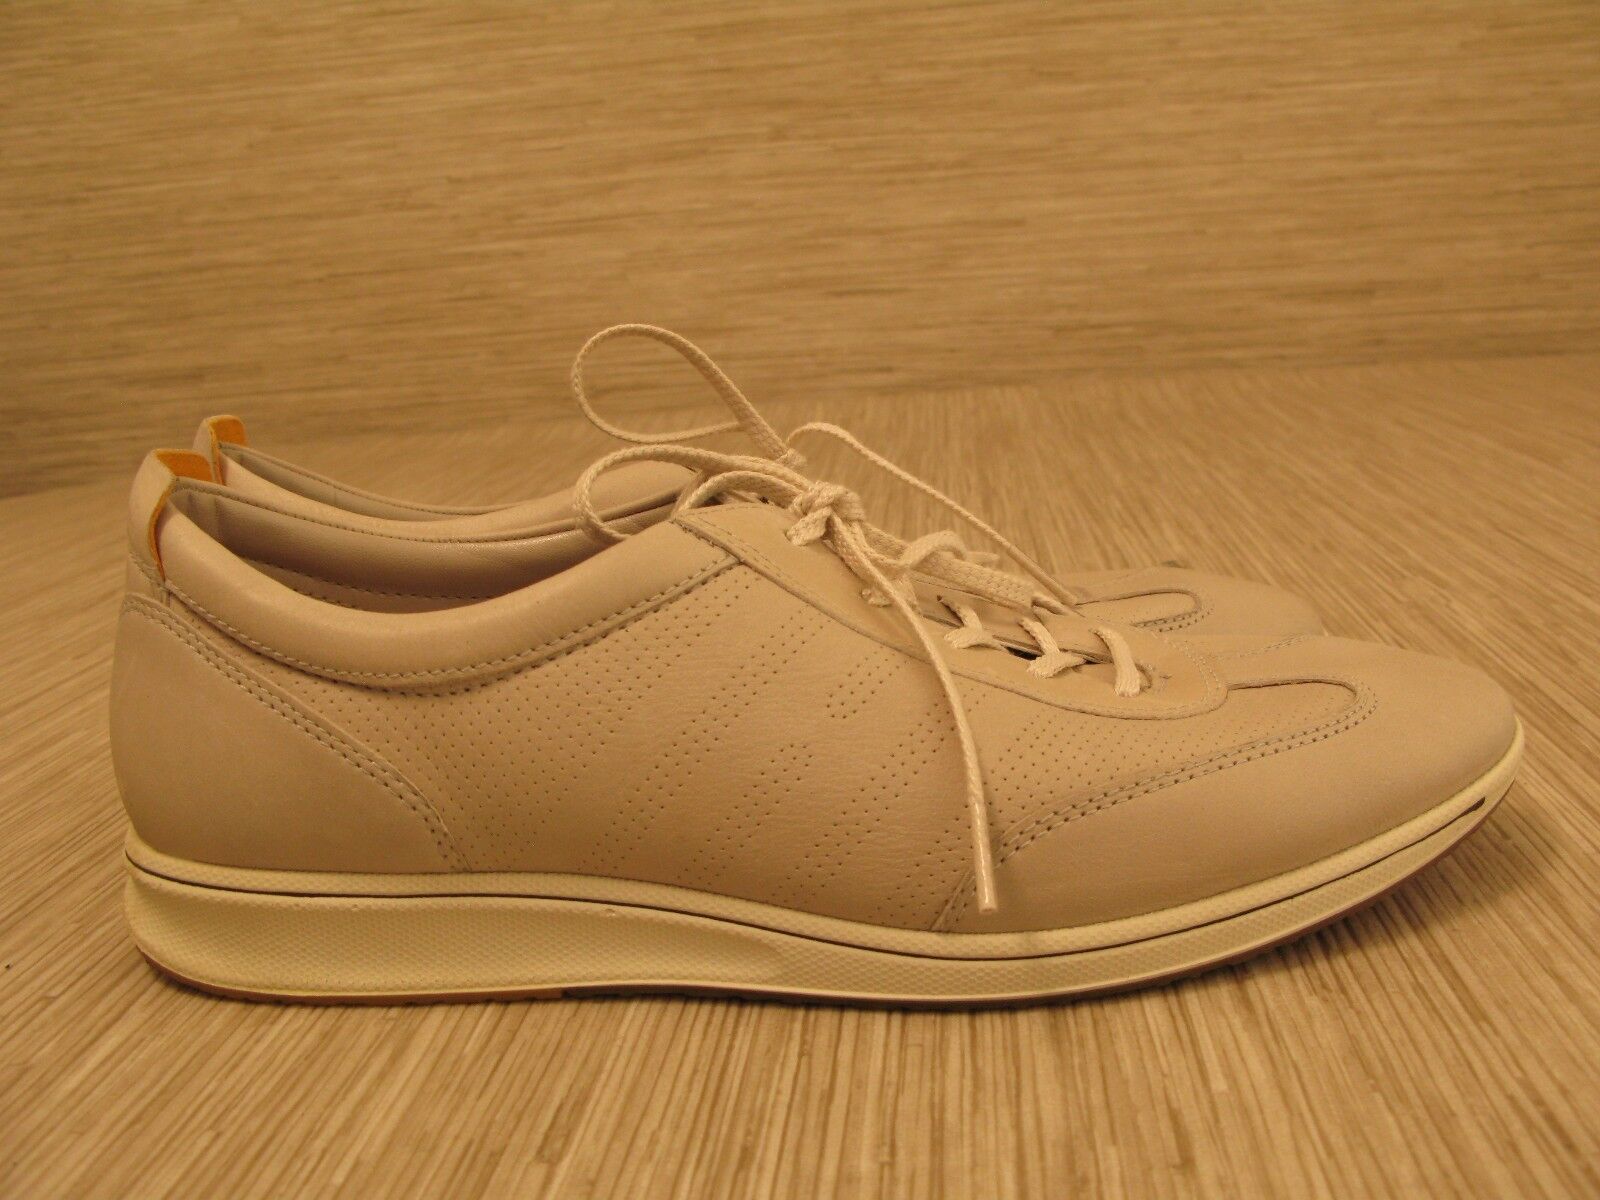 Ecco Leather Walking Shoes Womens US 10-11 EUR 41 Lace Up Oxfords Lightweight